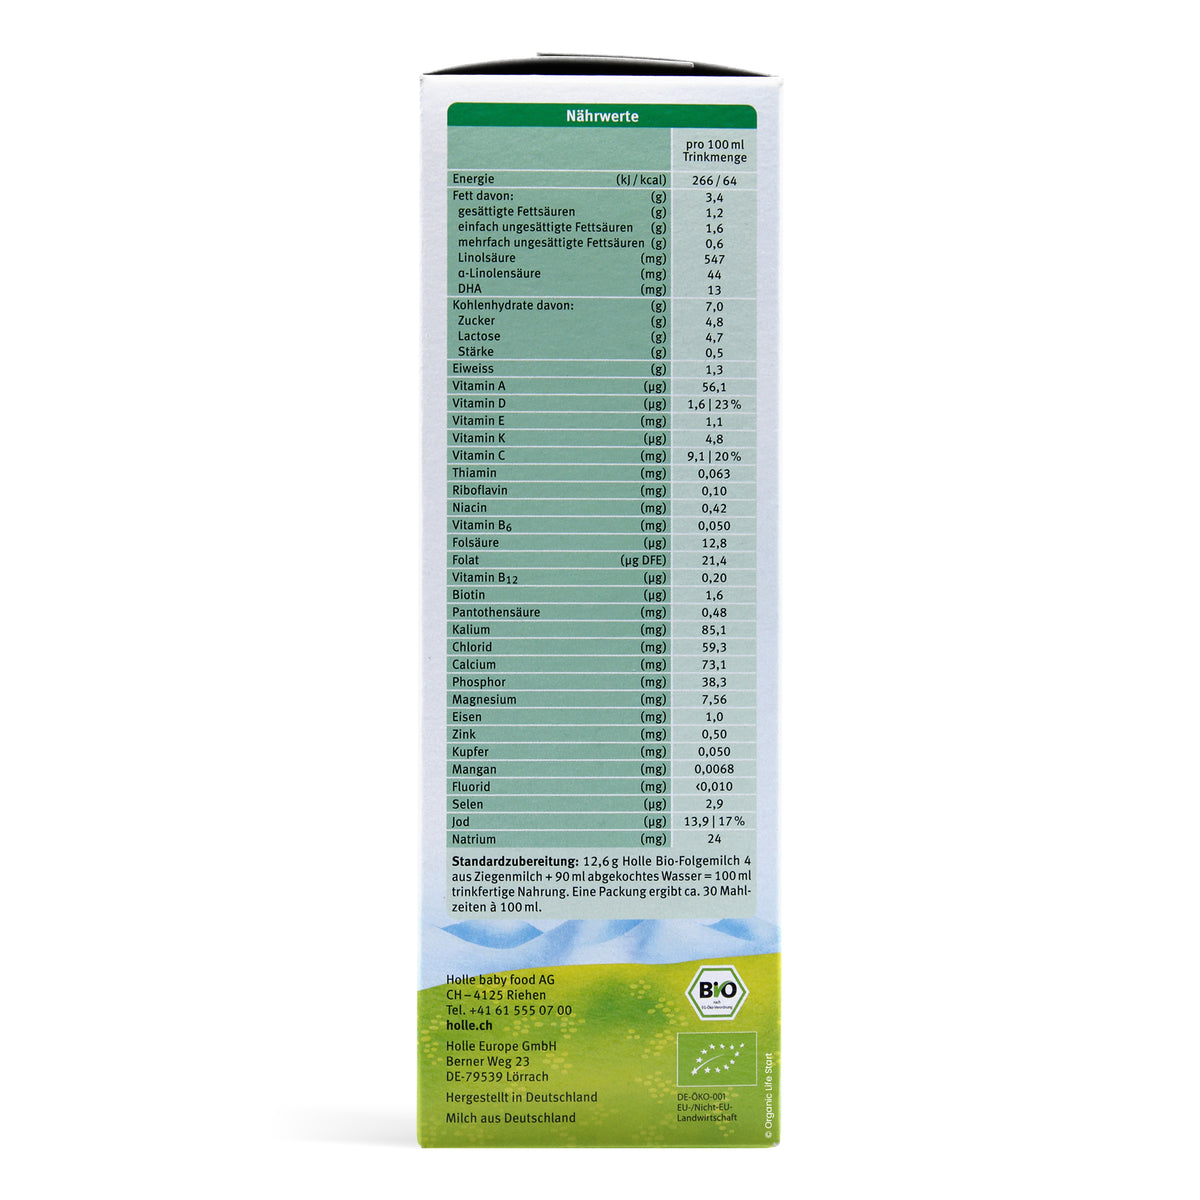 Holle Goat Stage 4 Ingredients Nutritional Information